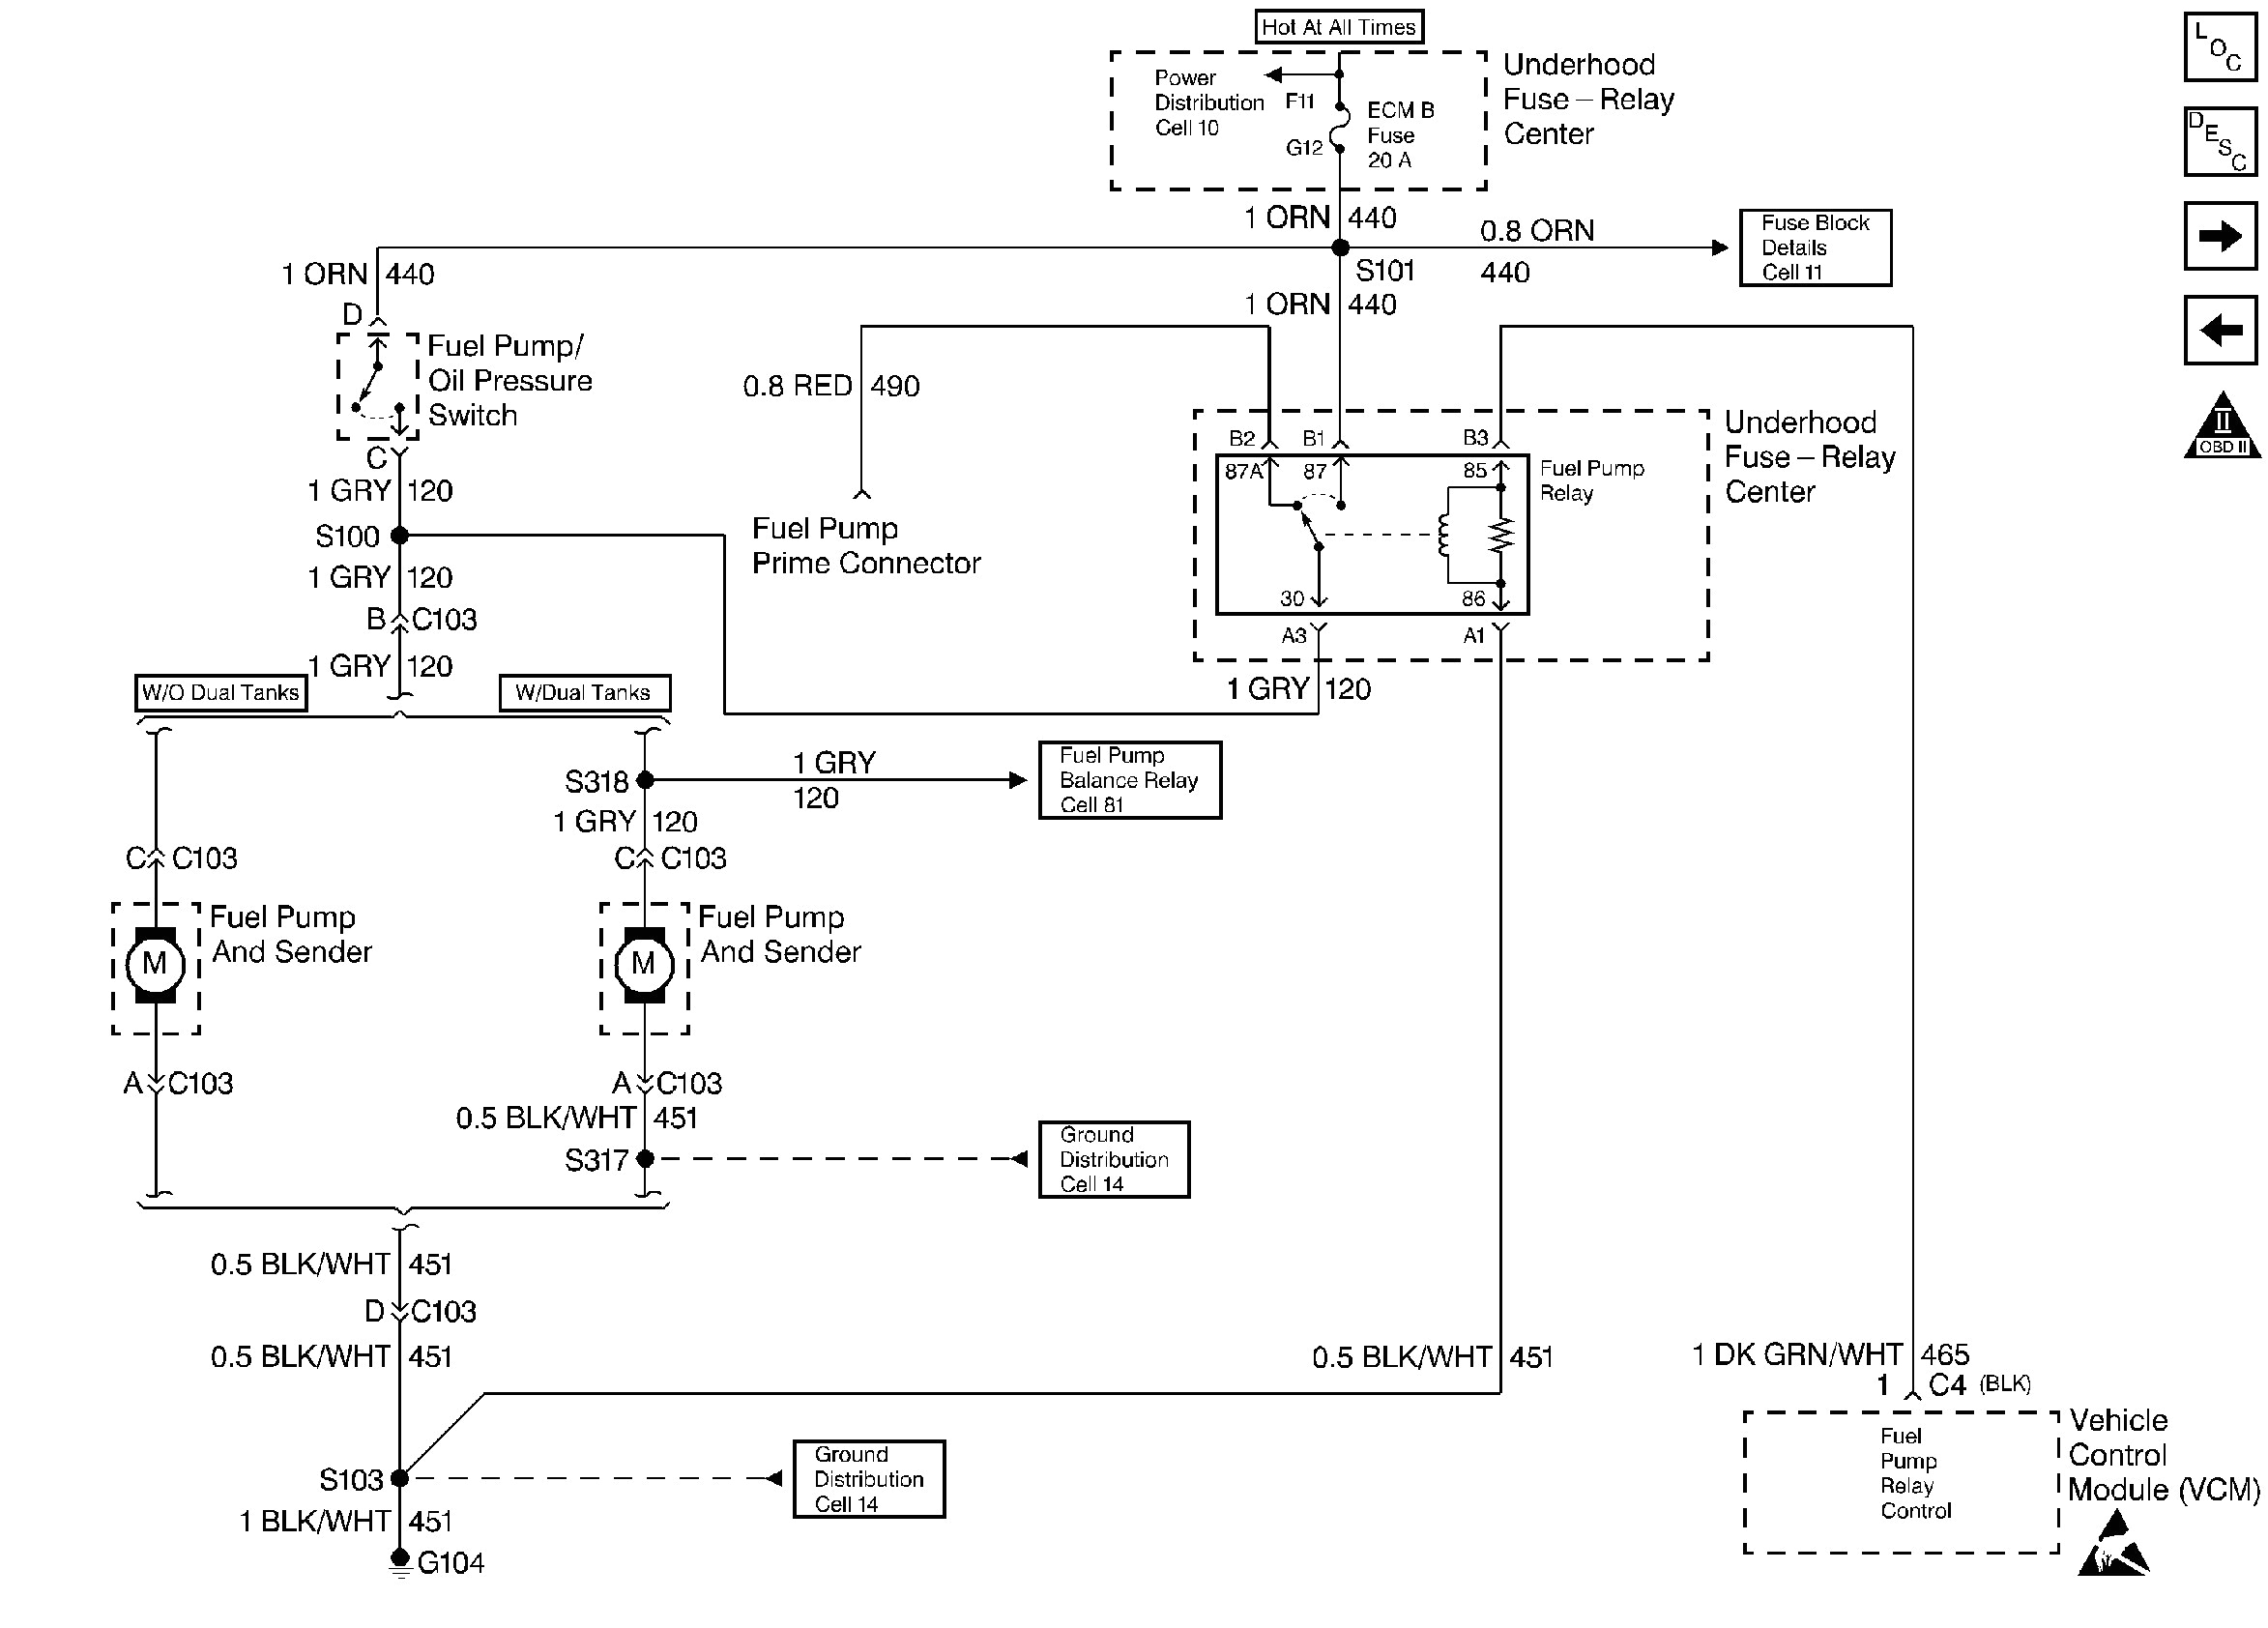 wiring diagram for extra fuel pump wiring diagrams konsult wiring diagram for extra fuel pump